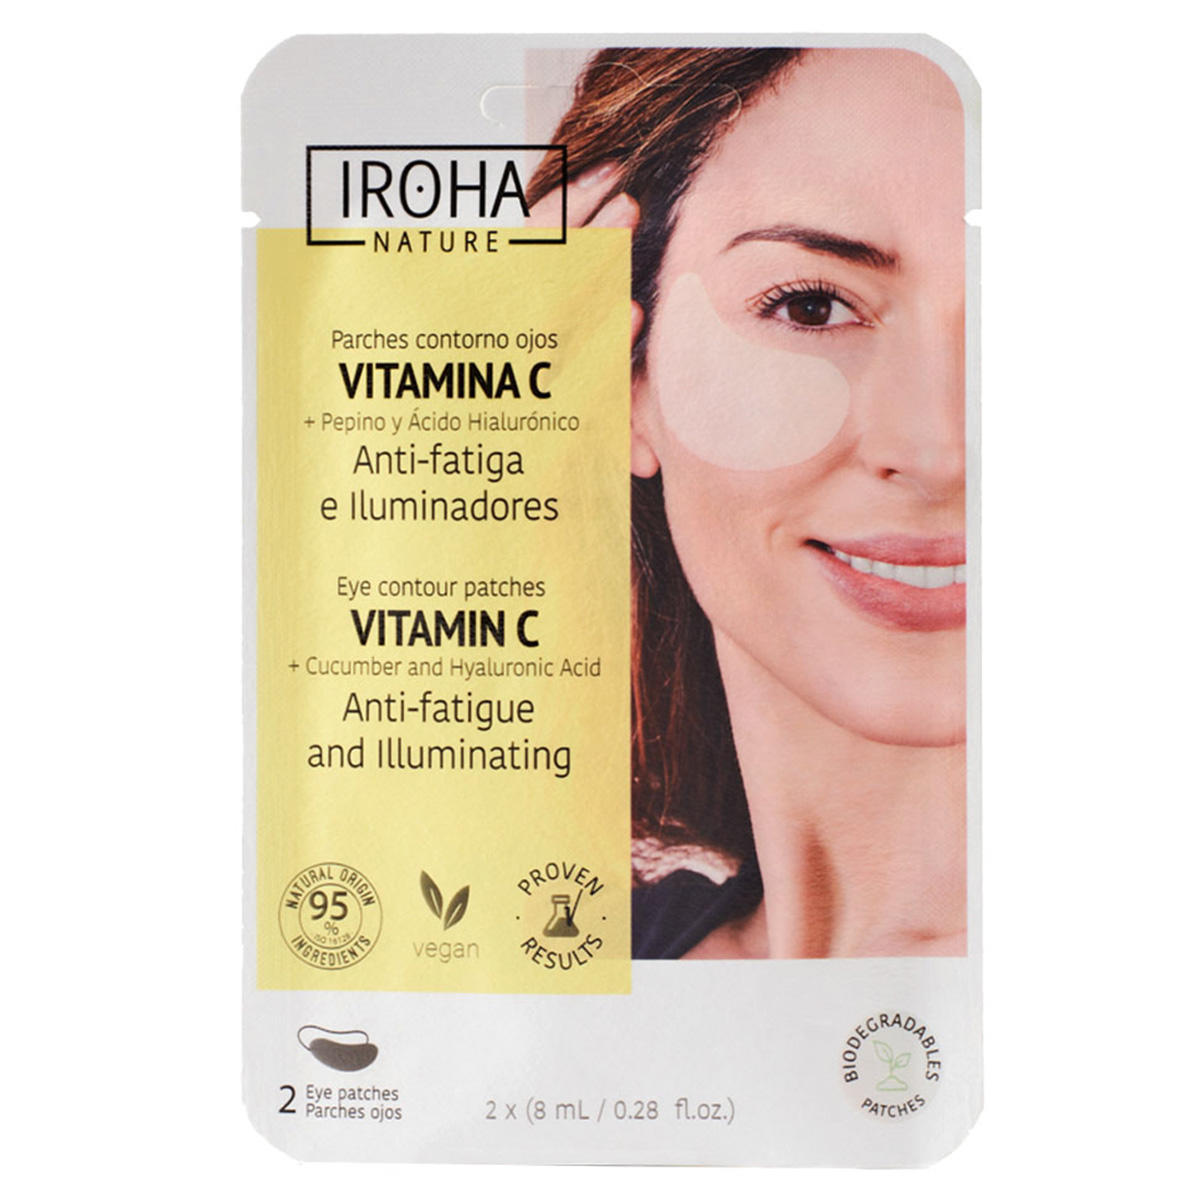 IROHA nature Eye Contour Patches Vitamin C + Cucumber and Hyaluronic Acid 2 x 8 ml - 1